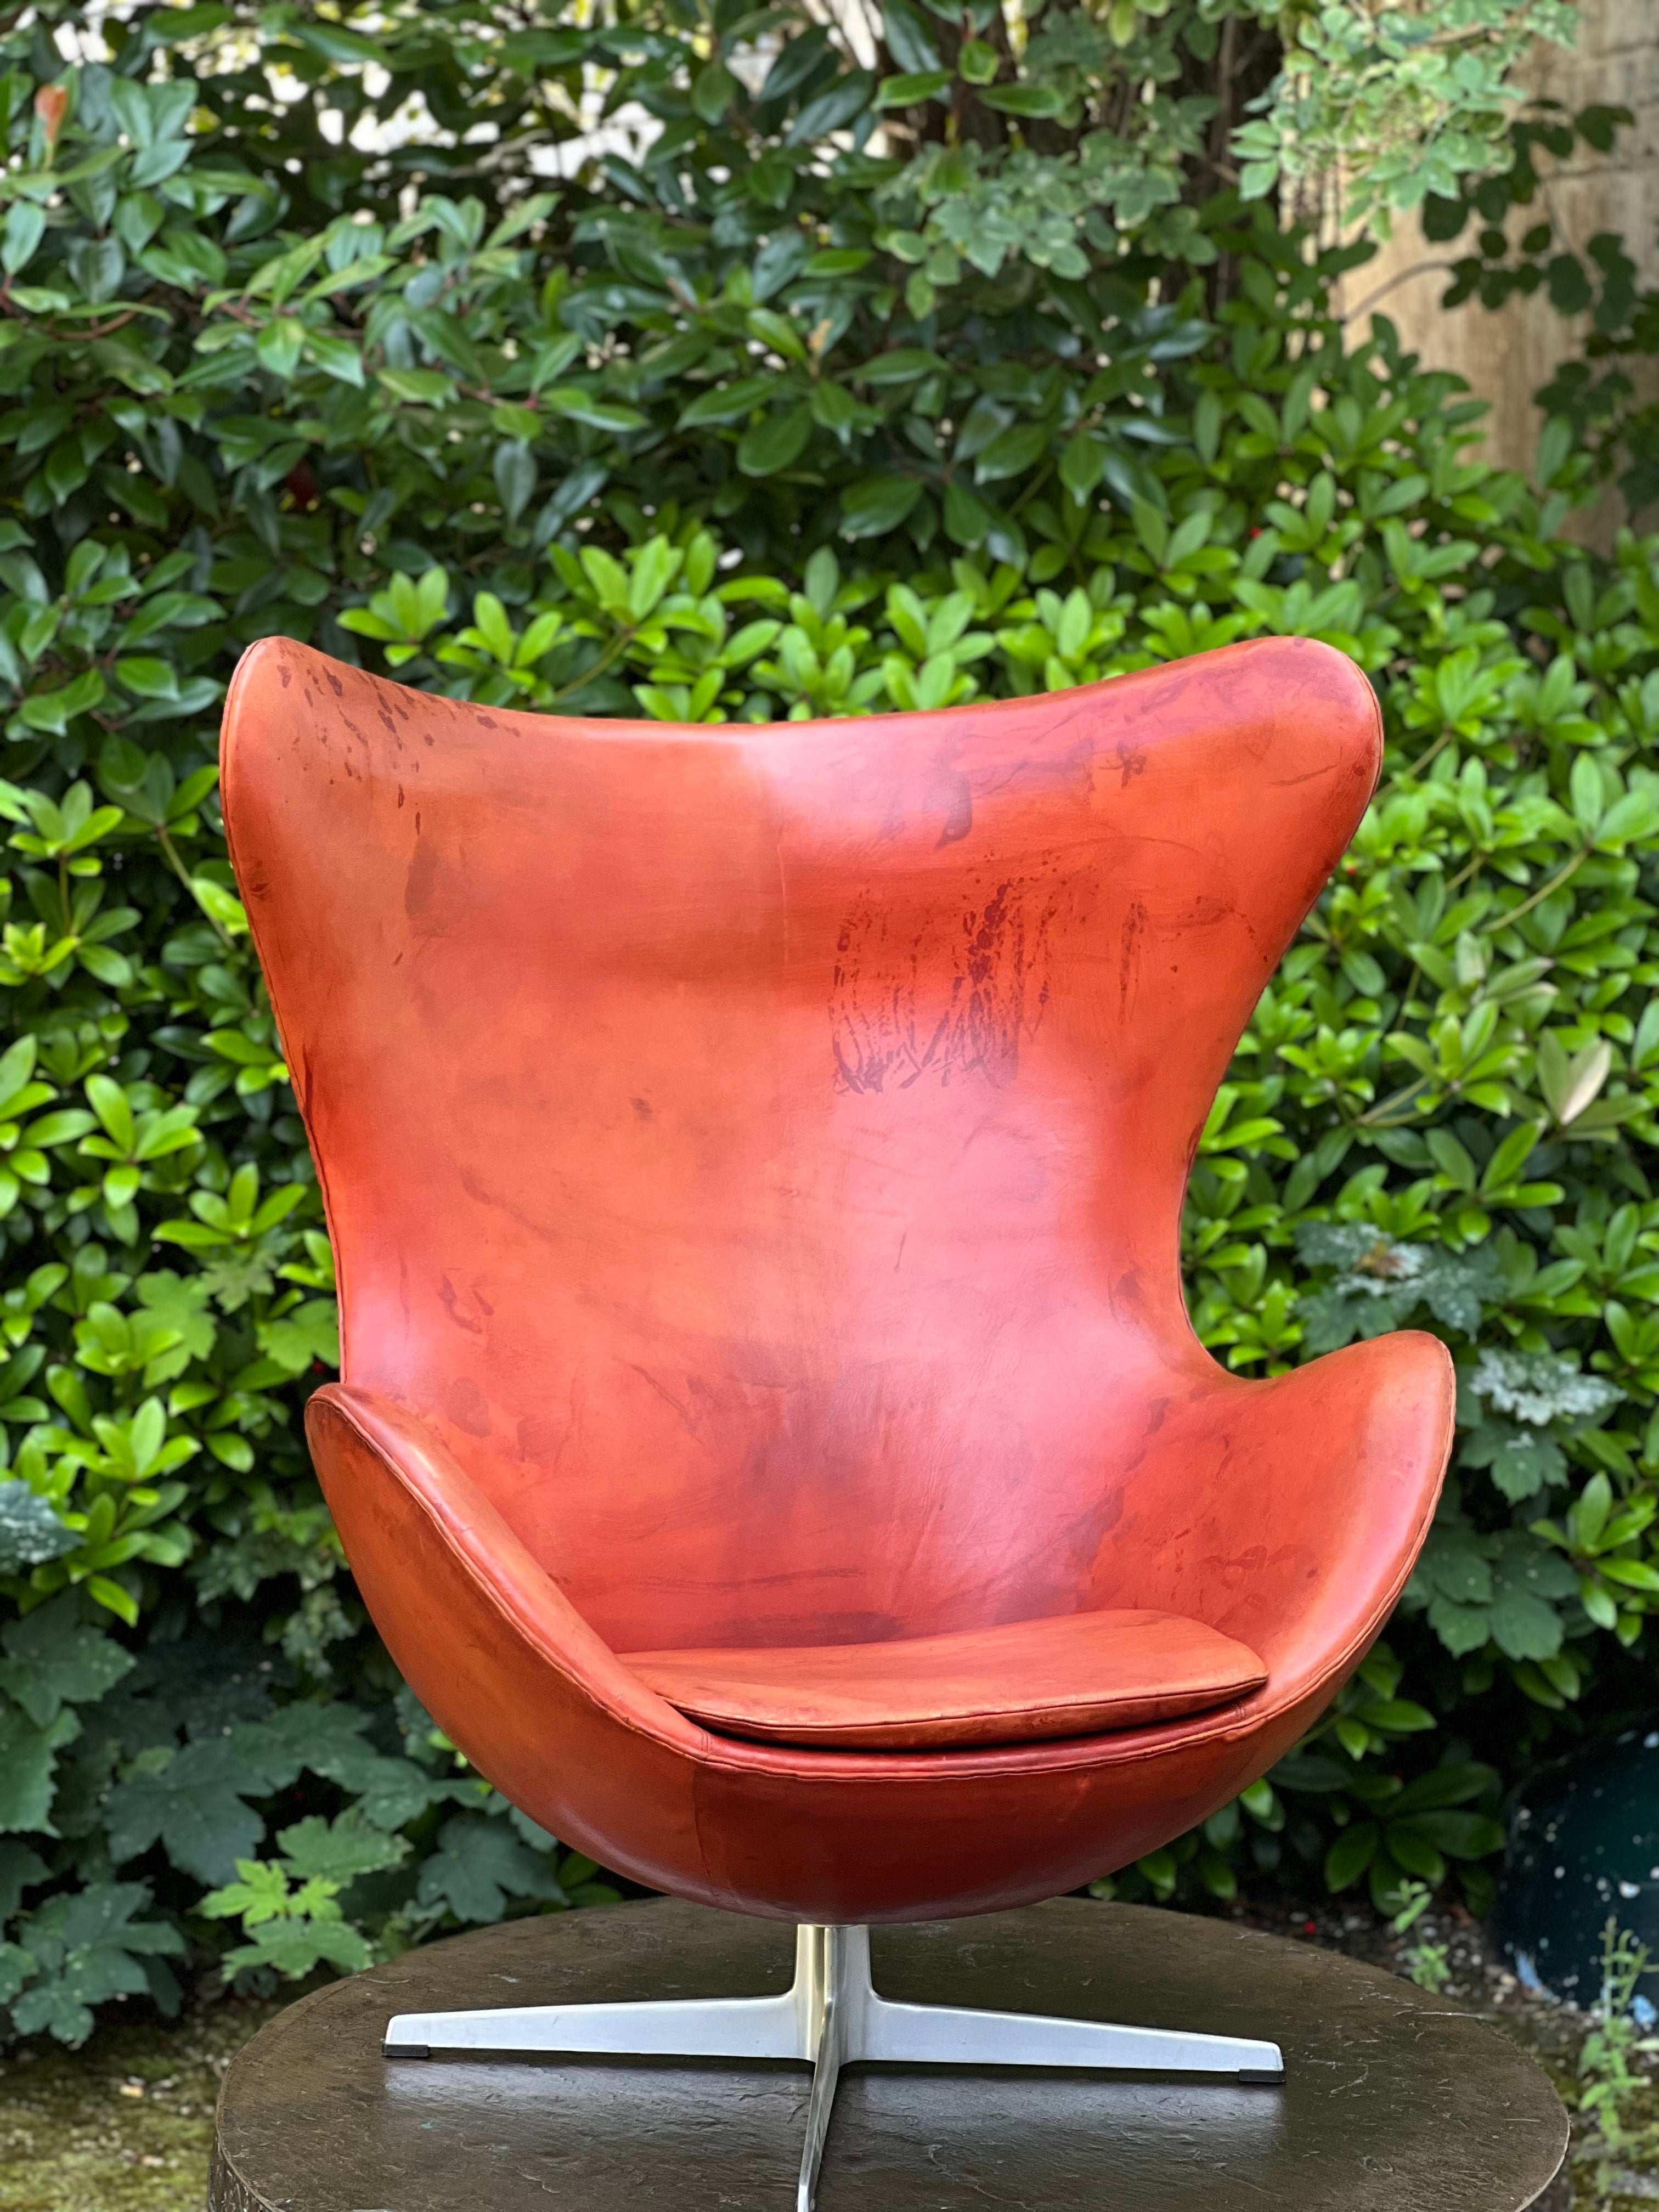 Early original Egg chair by master Danish architect Arne Jacobsen. Model designed for the Royal Hotel SAS in Copenhagen and completed in 1958. Lots of patina and traces of use but the leather is super strong and in very nice condition. The leather